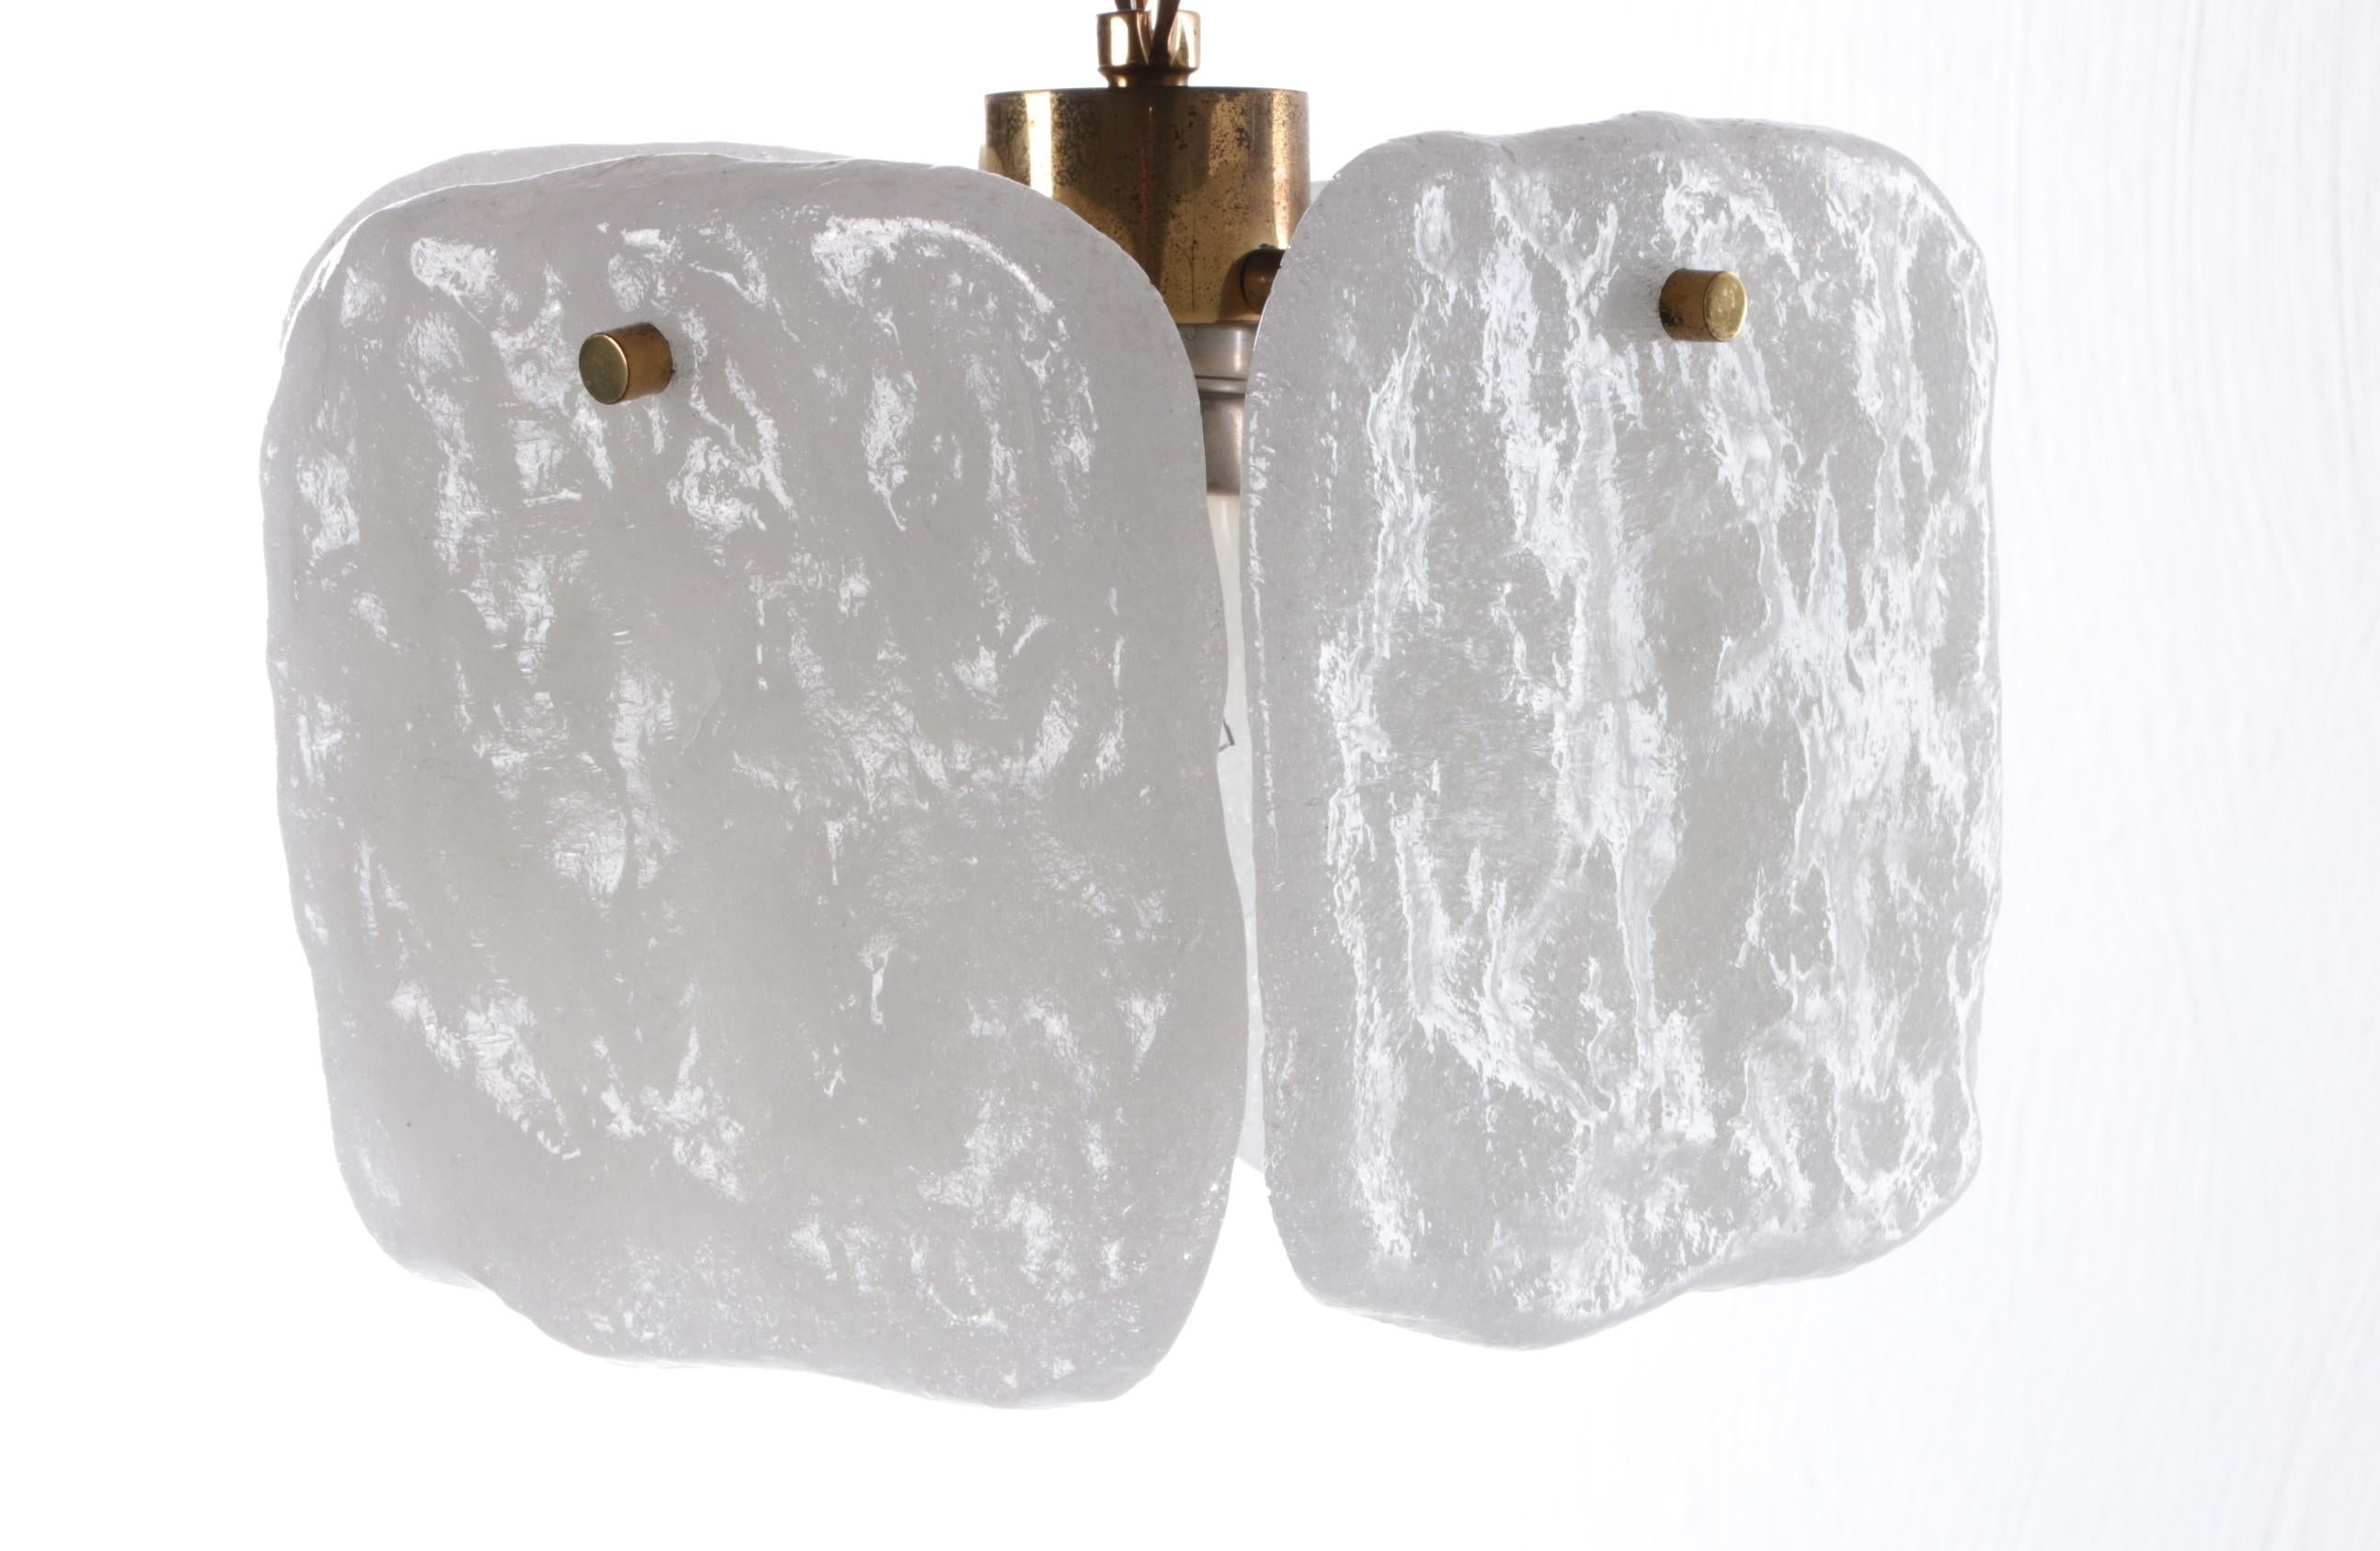 A quality vintage hanging lamp made in the 1960s by Kalmar Franken. This Austrian family business has been producing high-quality luxury lamps since 1881.

This vintage piece has four glass plates with a relief and texture reminiscent of melting ice